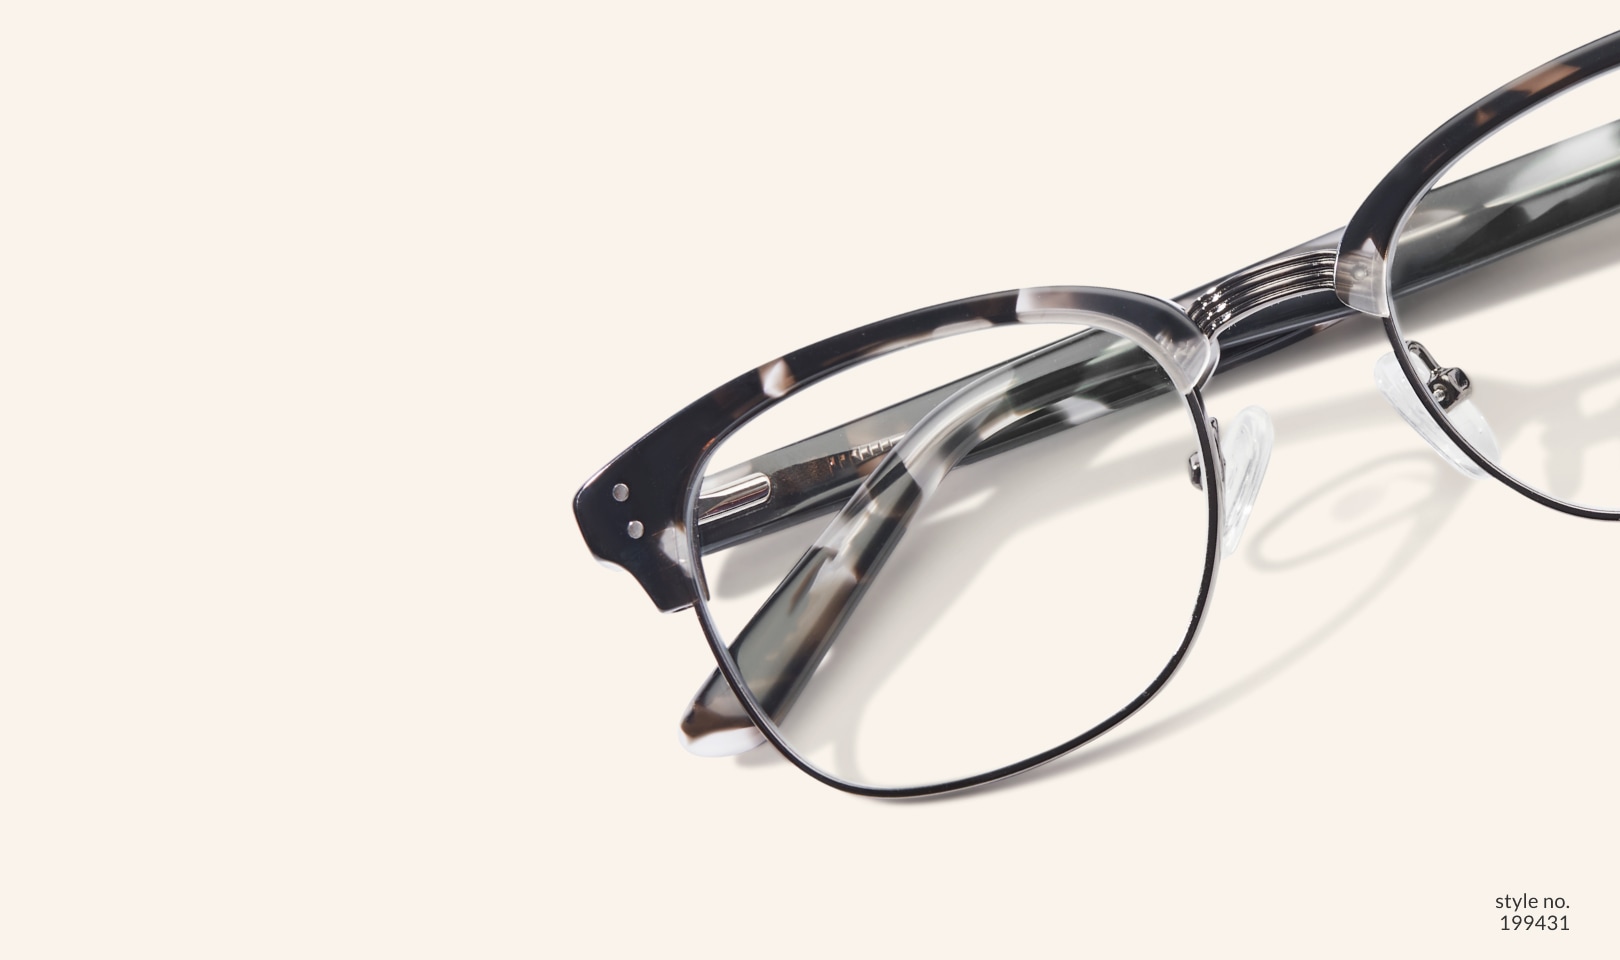 Image of Zenni black-patterned browline glasses style #199431 shown with a beige background.